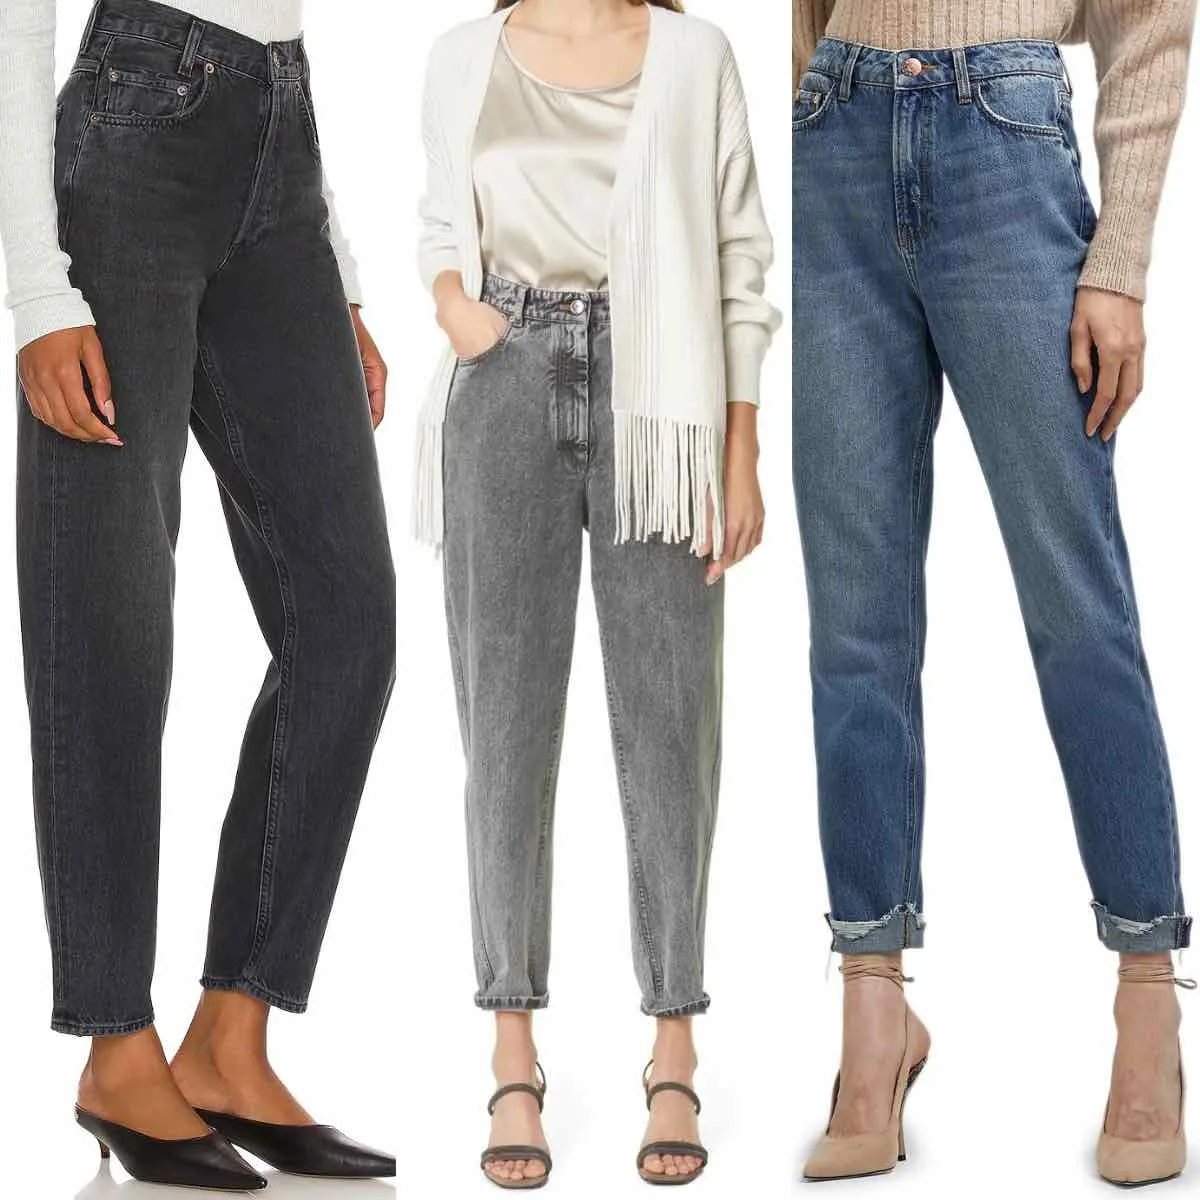 3 women wearing heels with mom jeans outfits.